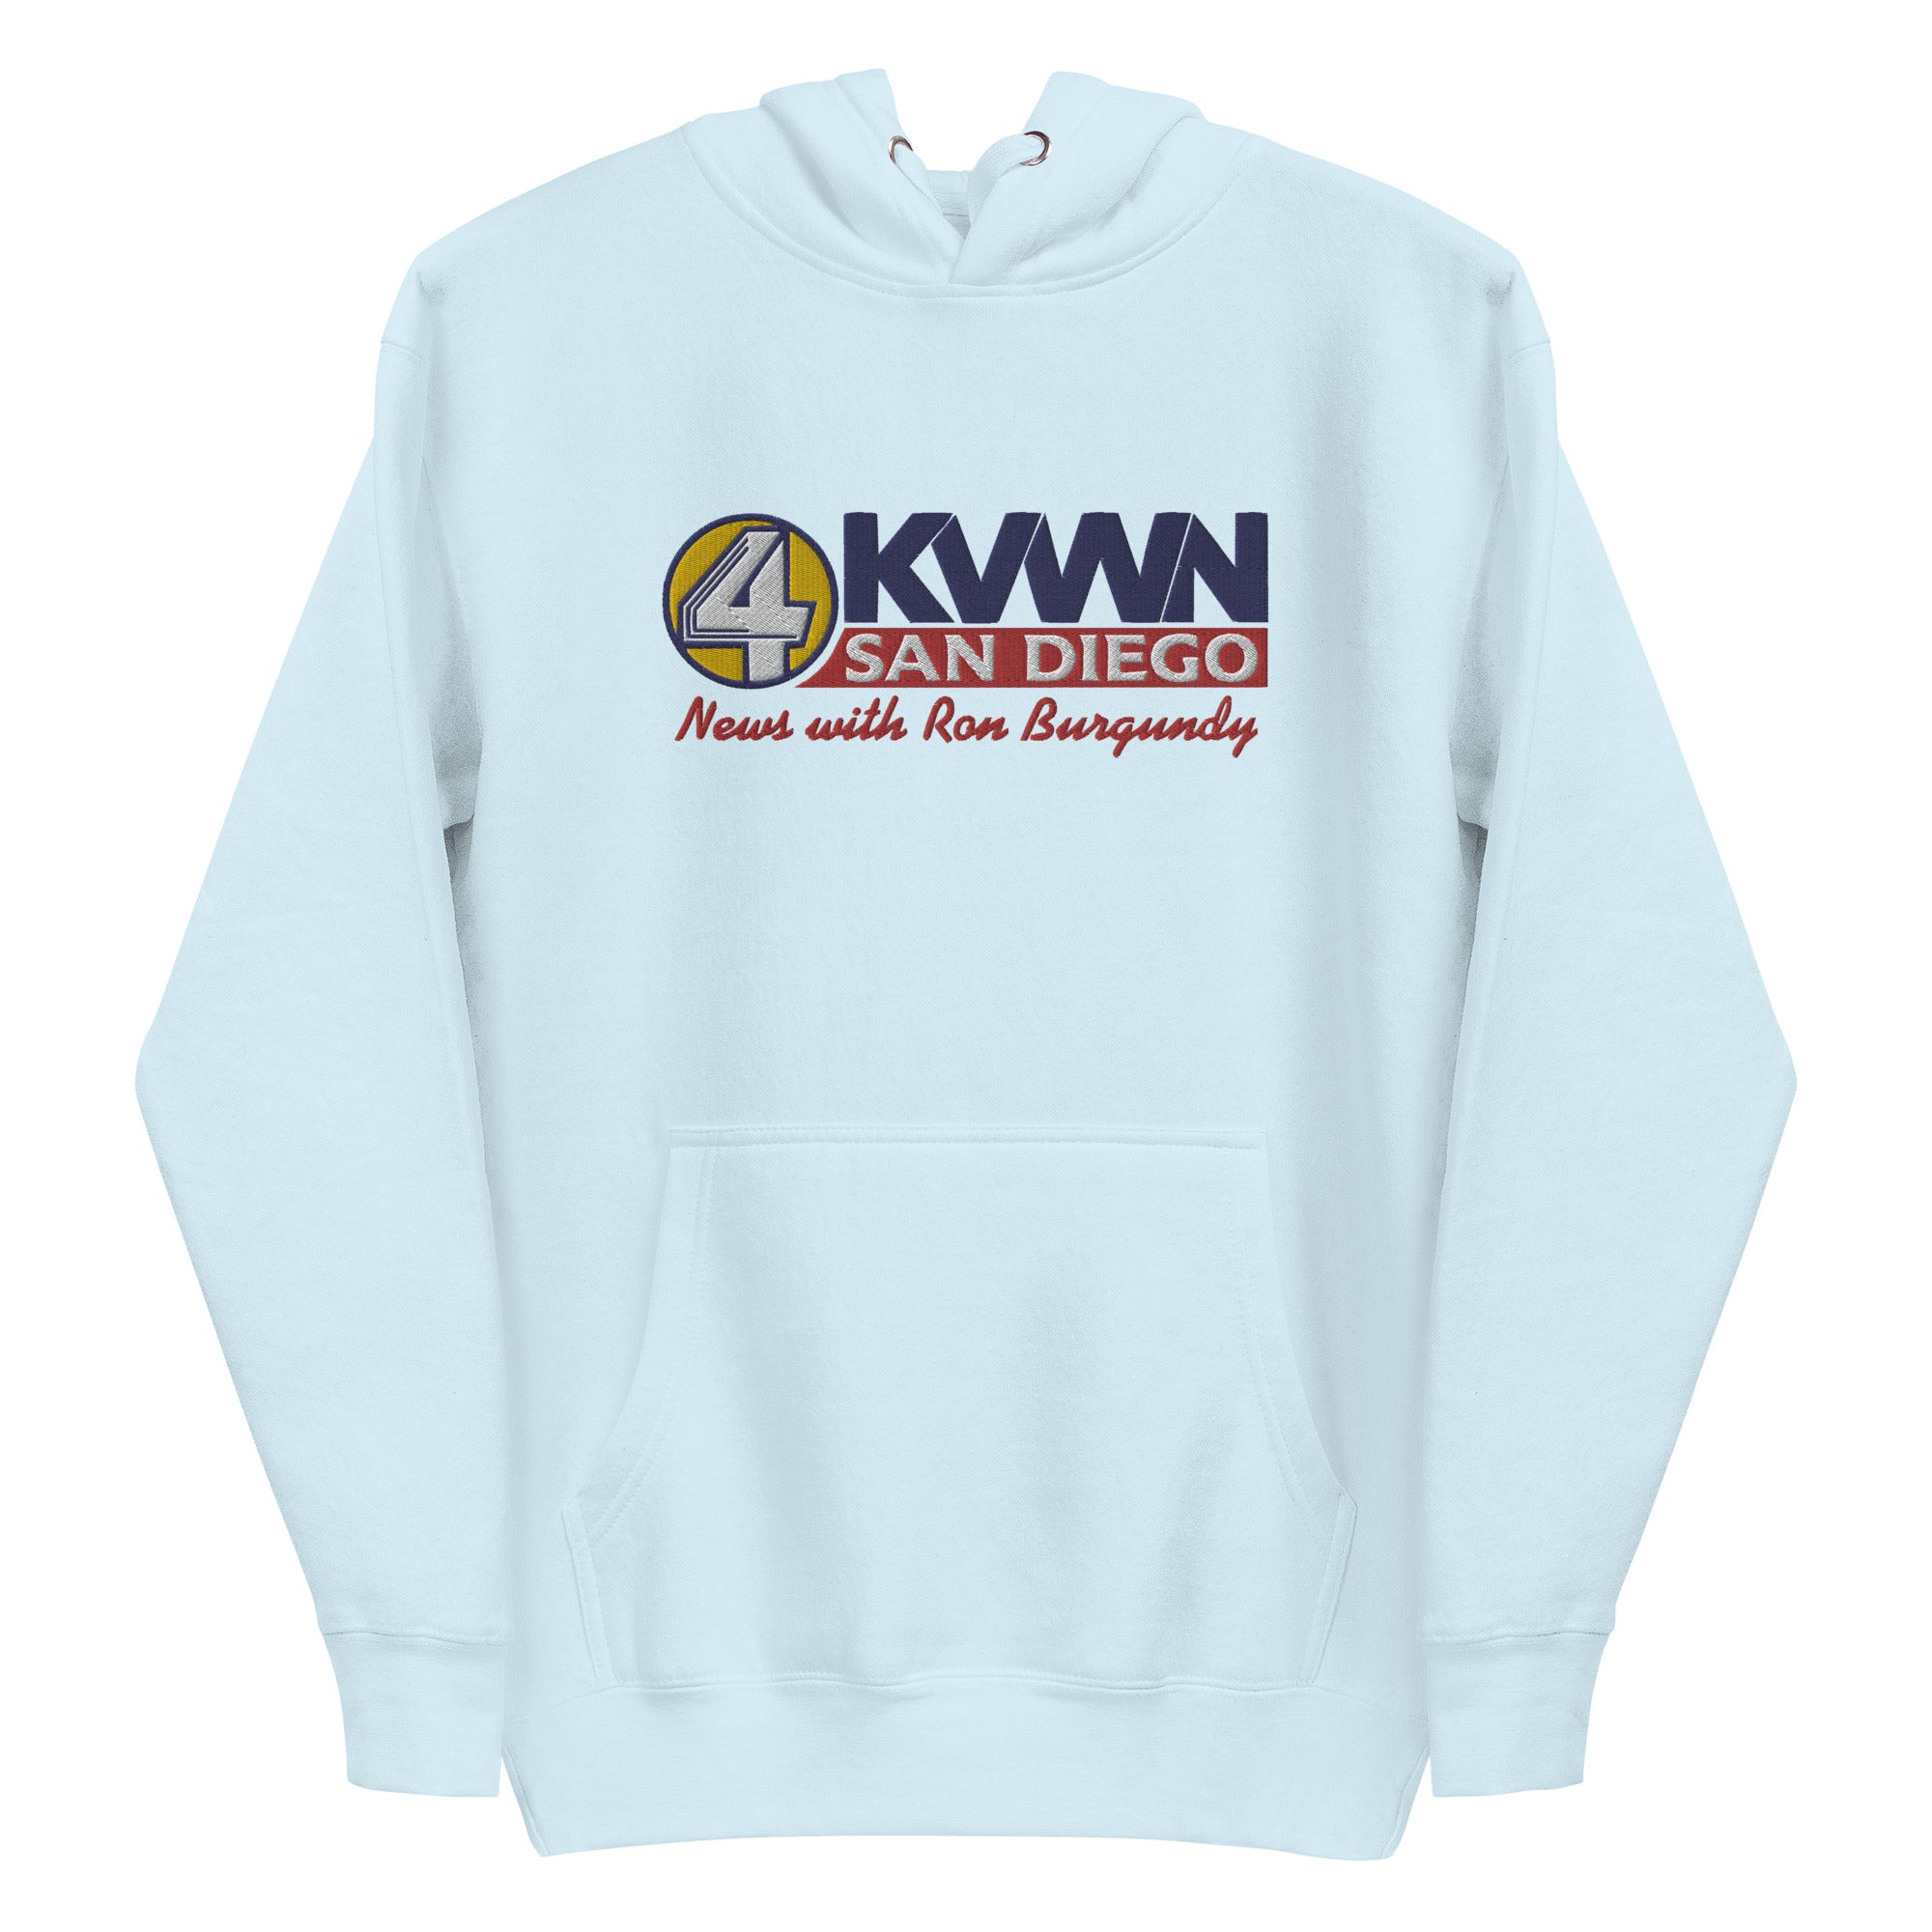 KVWN News with Ron Burgundy Embroidered Hoodie